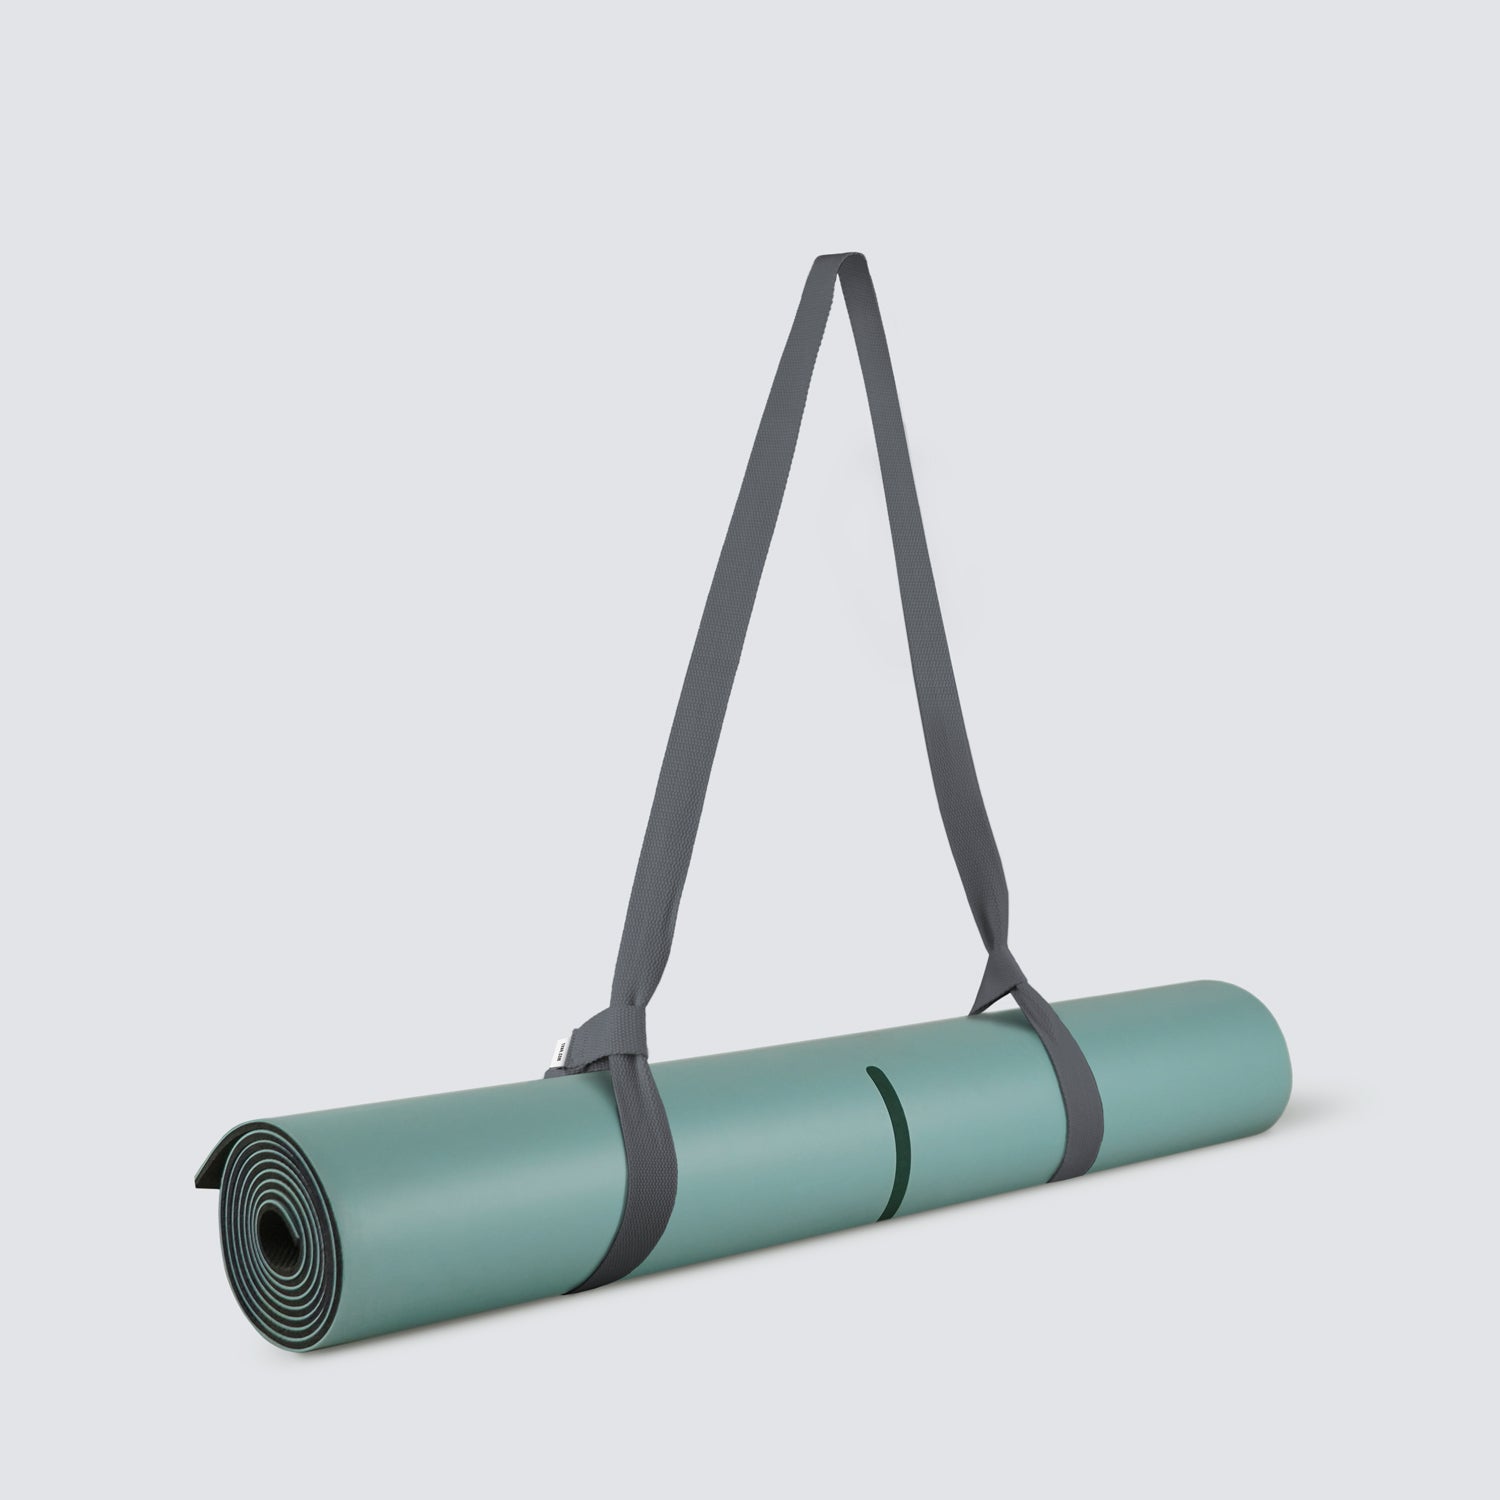 Rolled-up TRNR Fusion Mat in Mint Colour and 4 mm Thickness | Featuring Grey Carry Strap